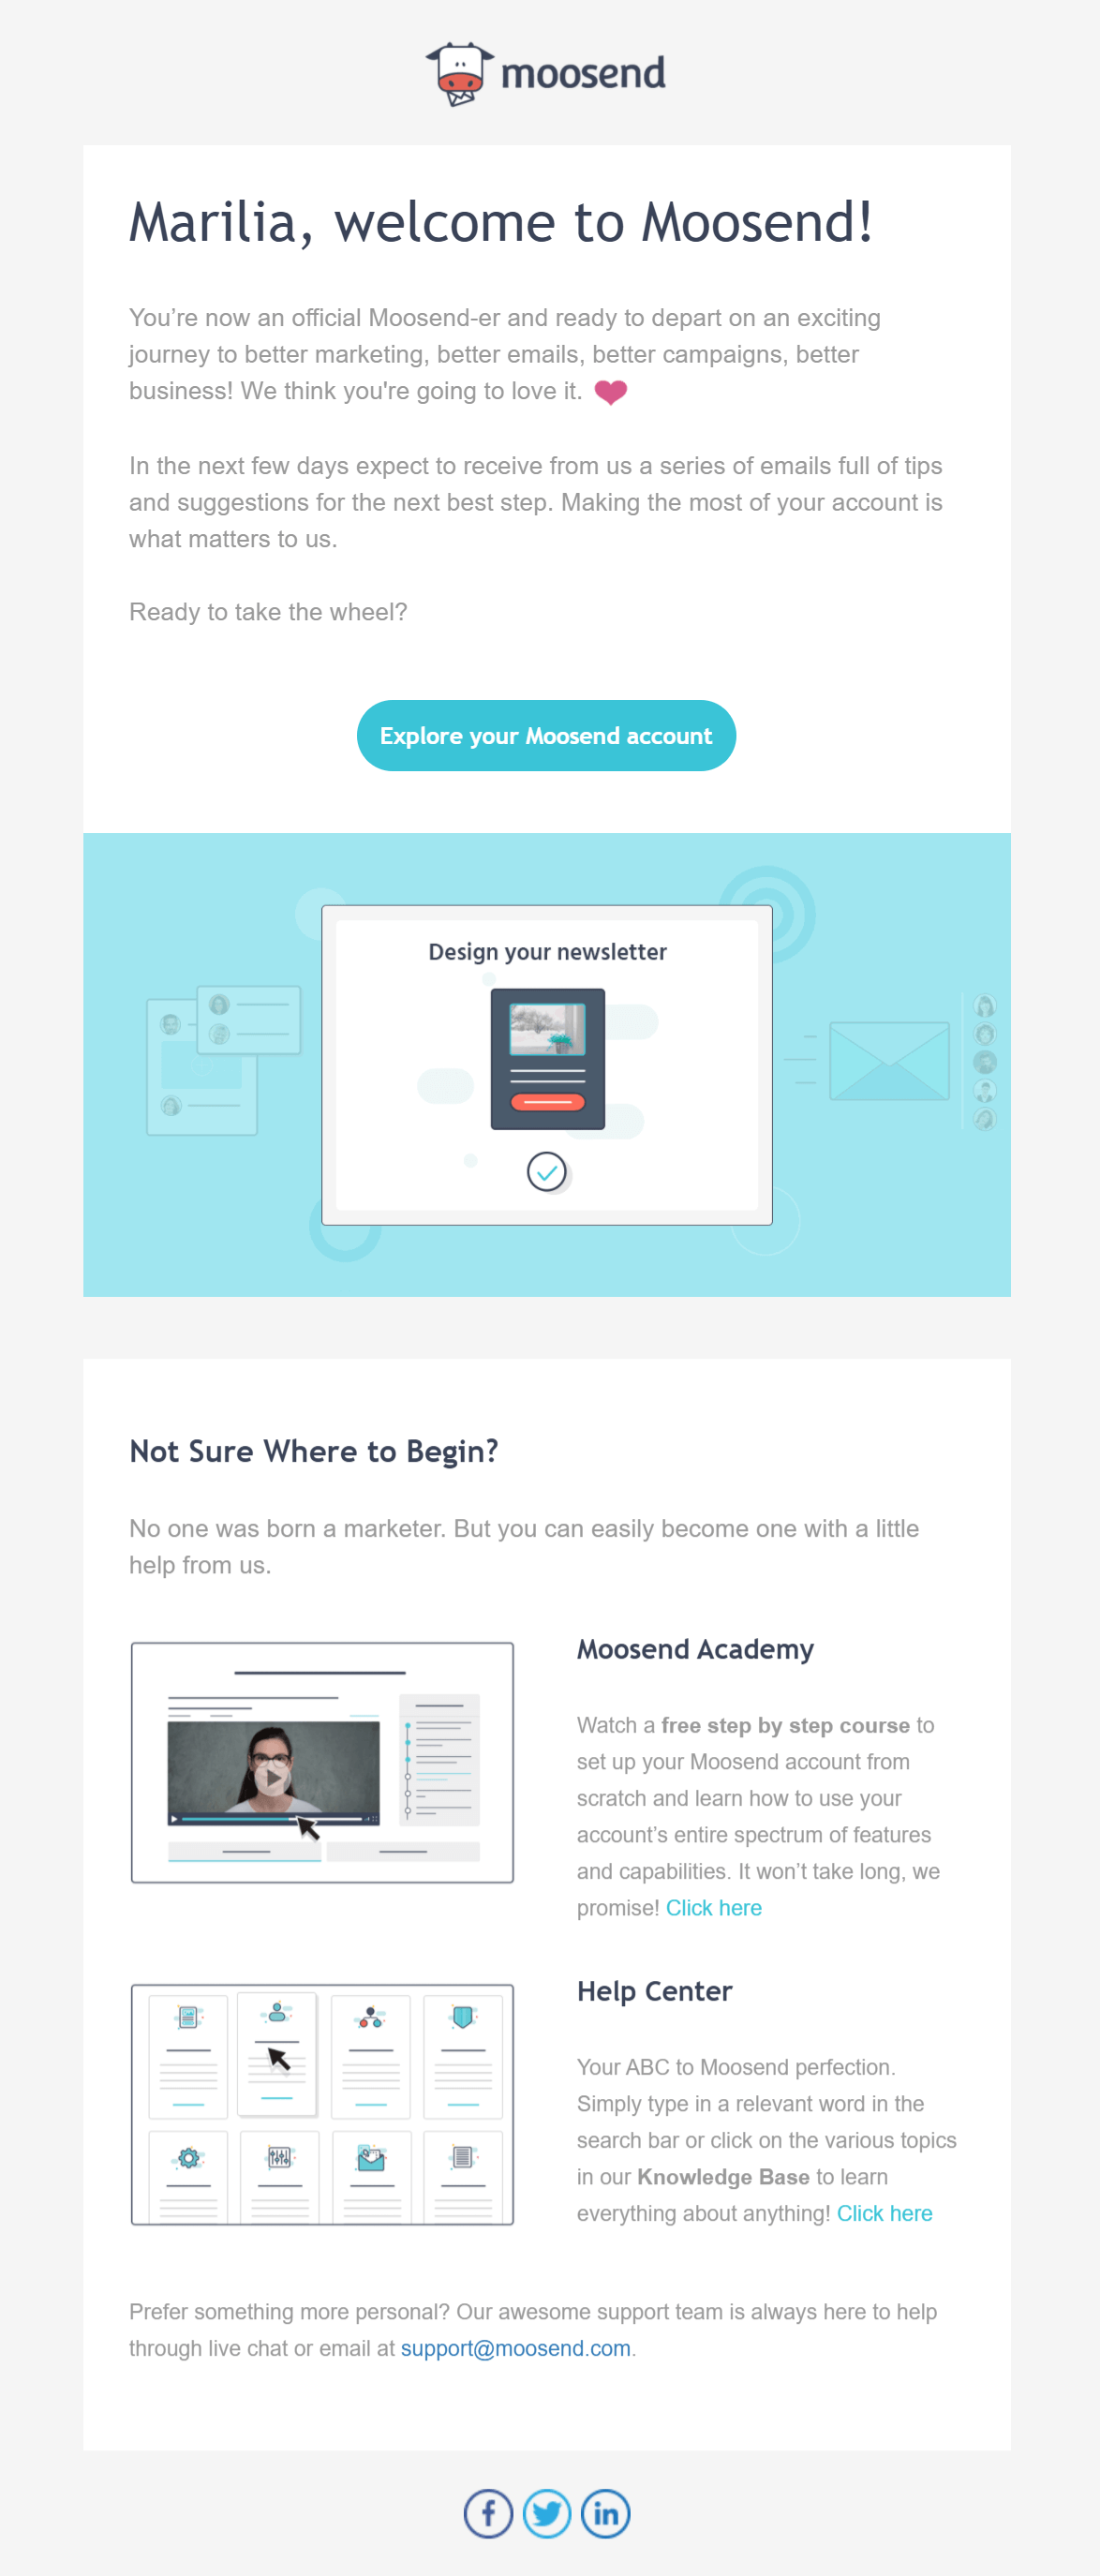 Email templates - Knowledge Base